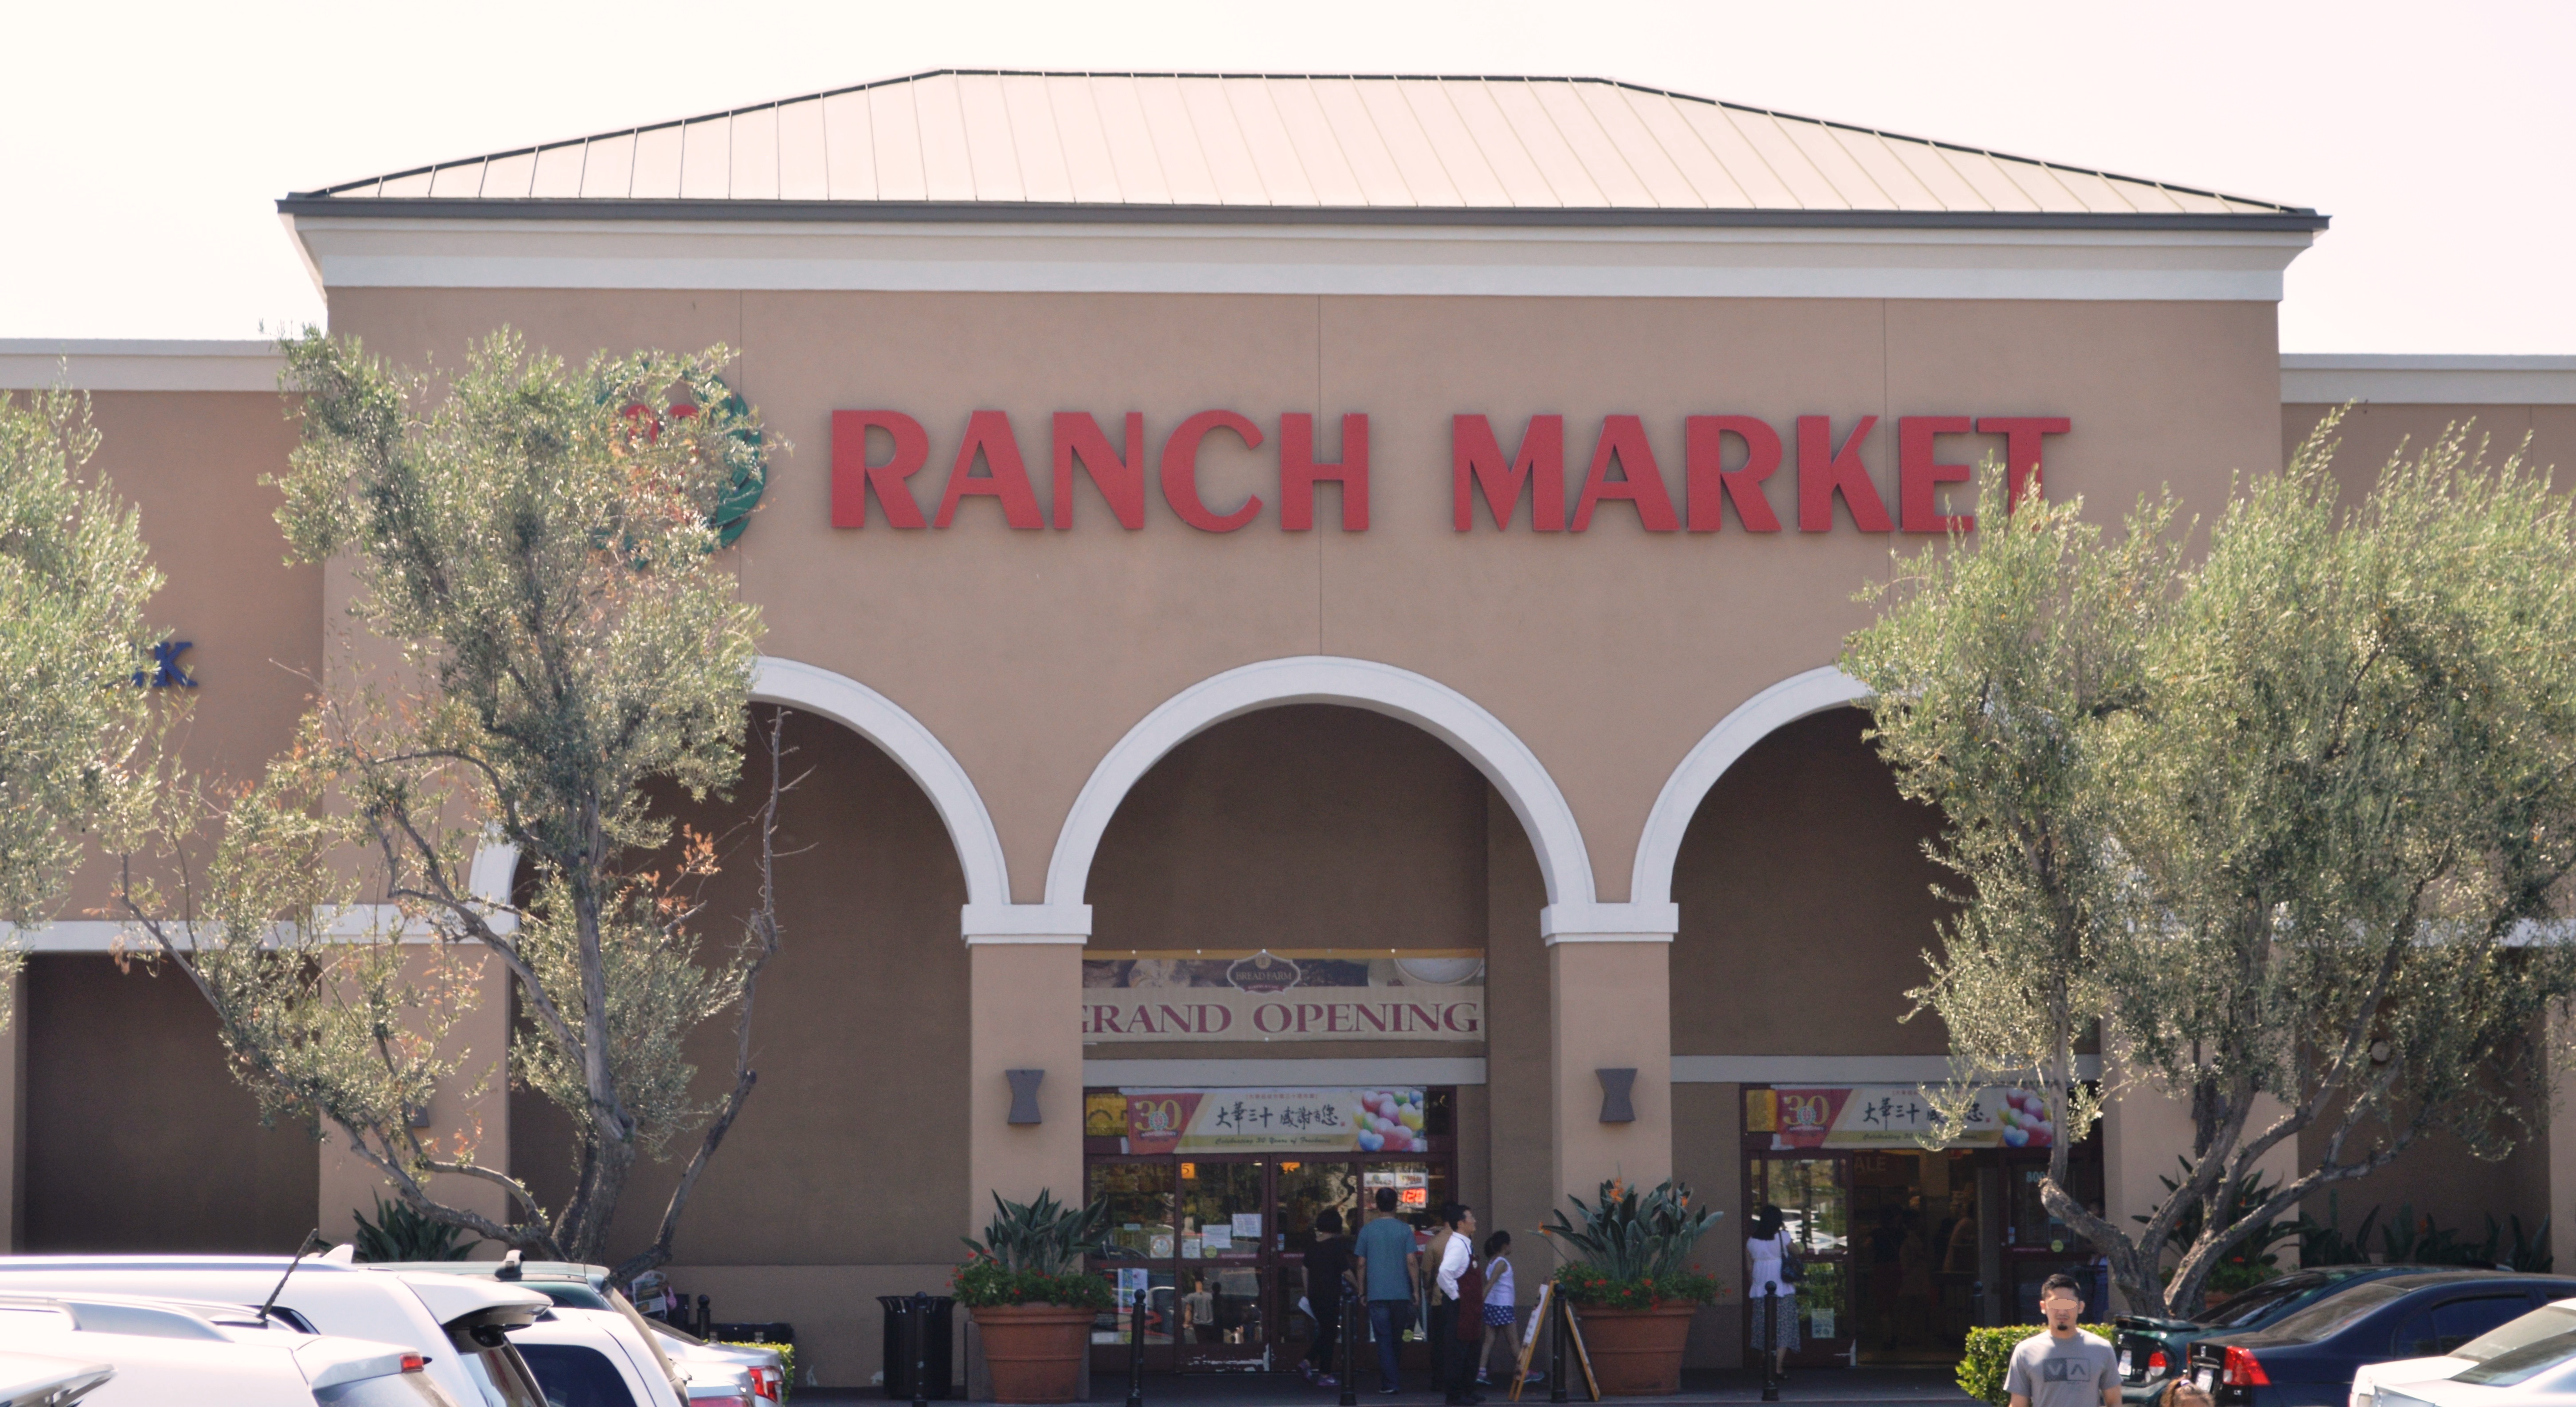 Tis the Season‍ to Shop: Discover 99 Ranch Market's Extended Holiday Hours